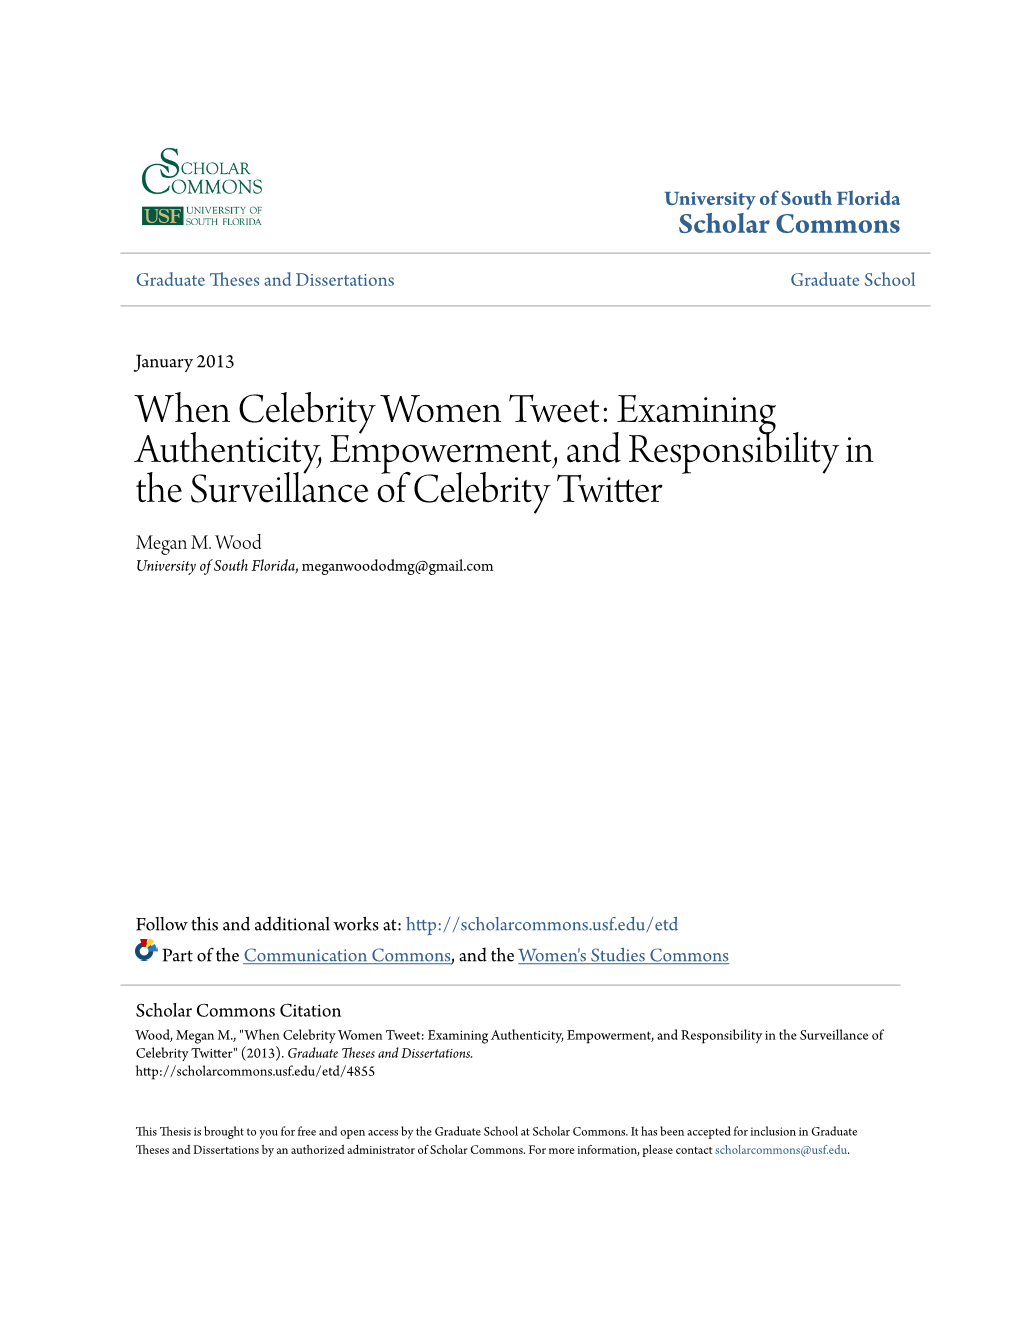 When Celebrity Women Tweet: Examining Authenticity, Empowerment, and Responsibility in the Surveillance of Celebrity Twitter Megan M